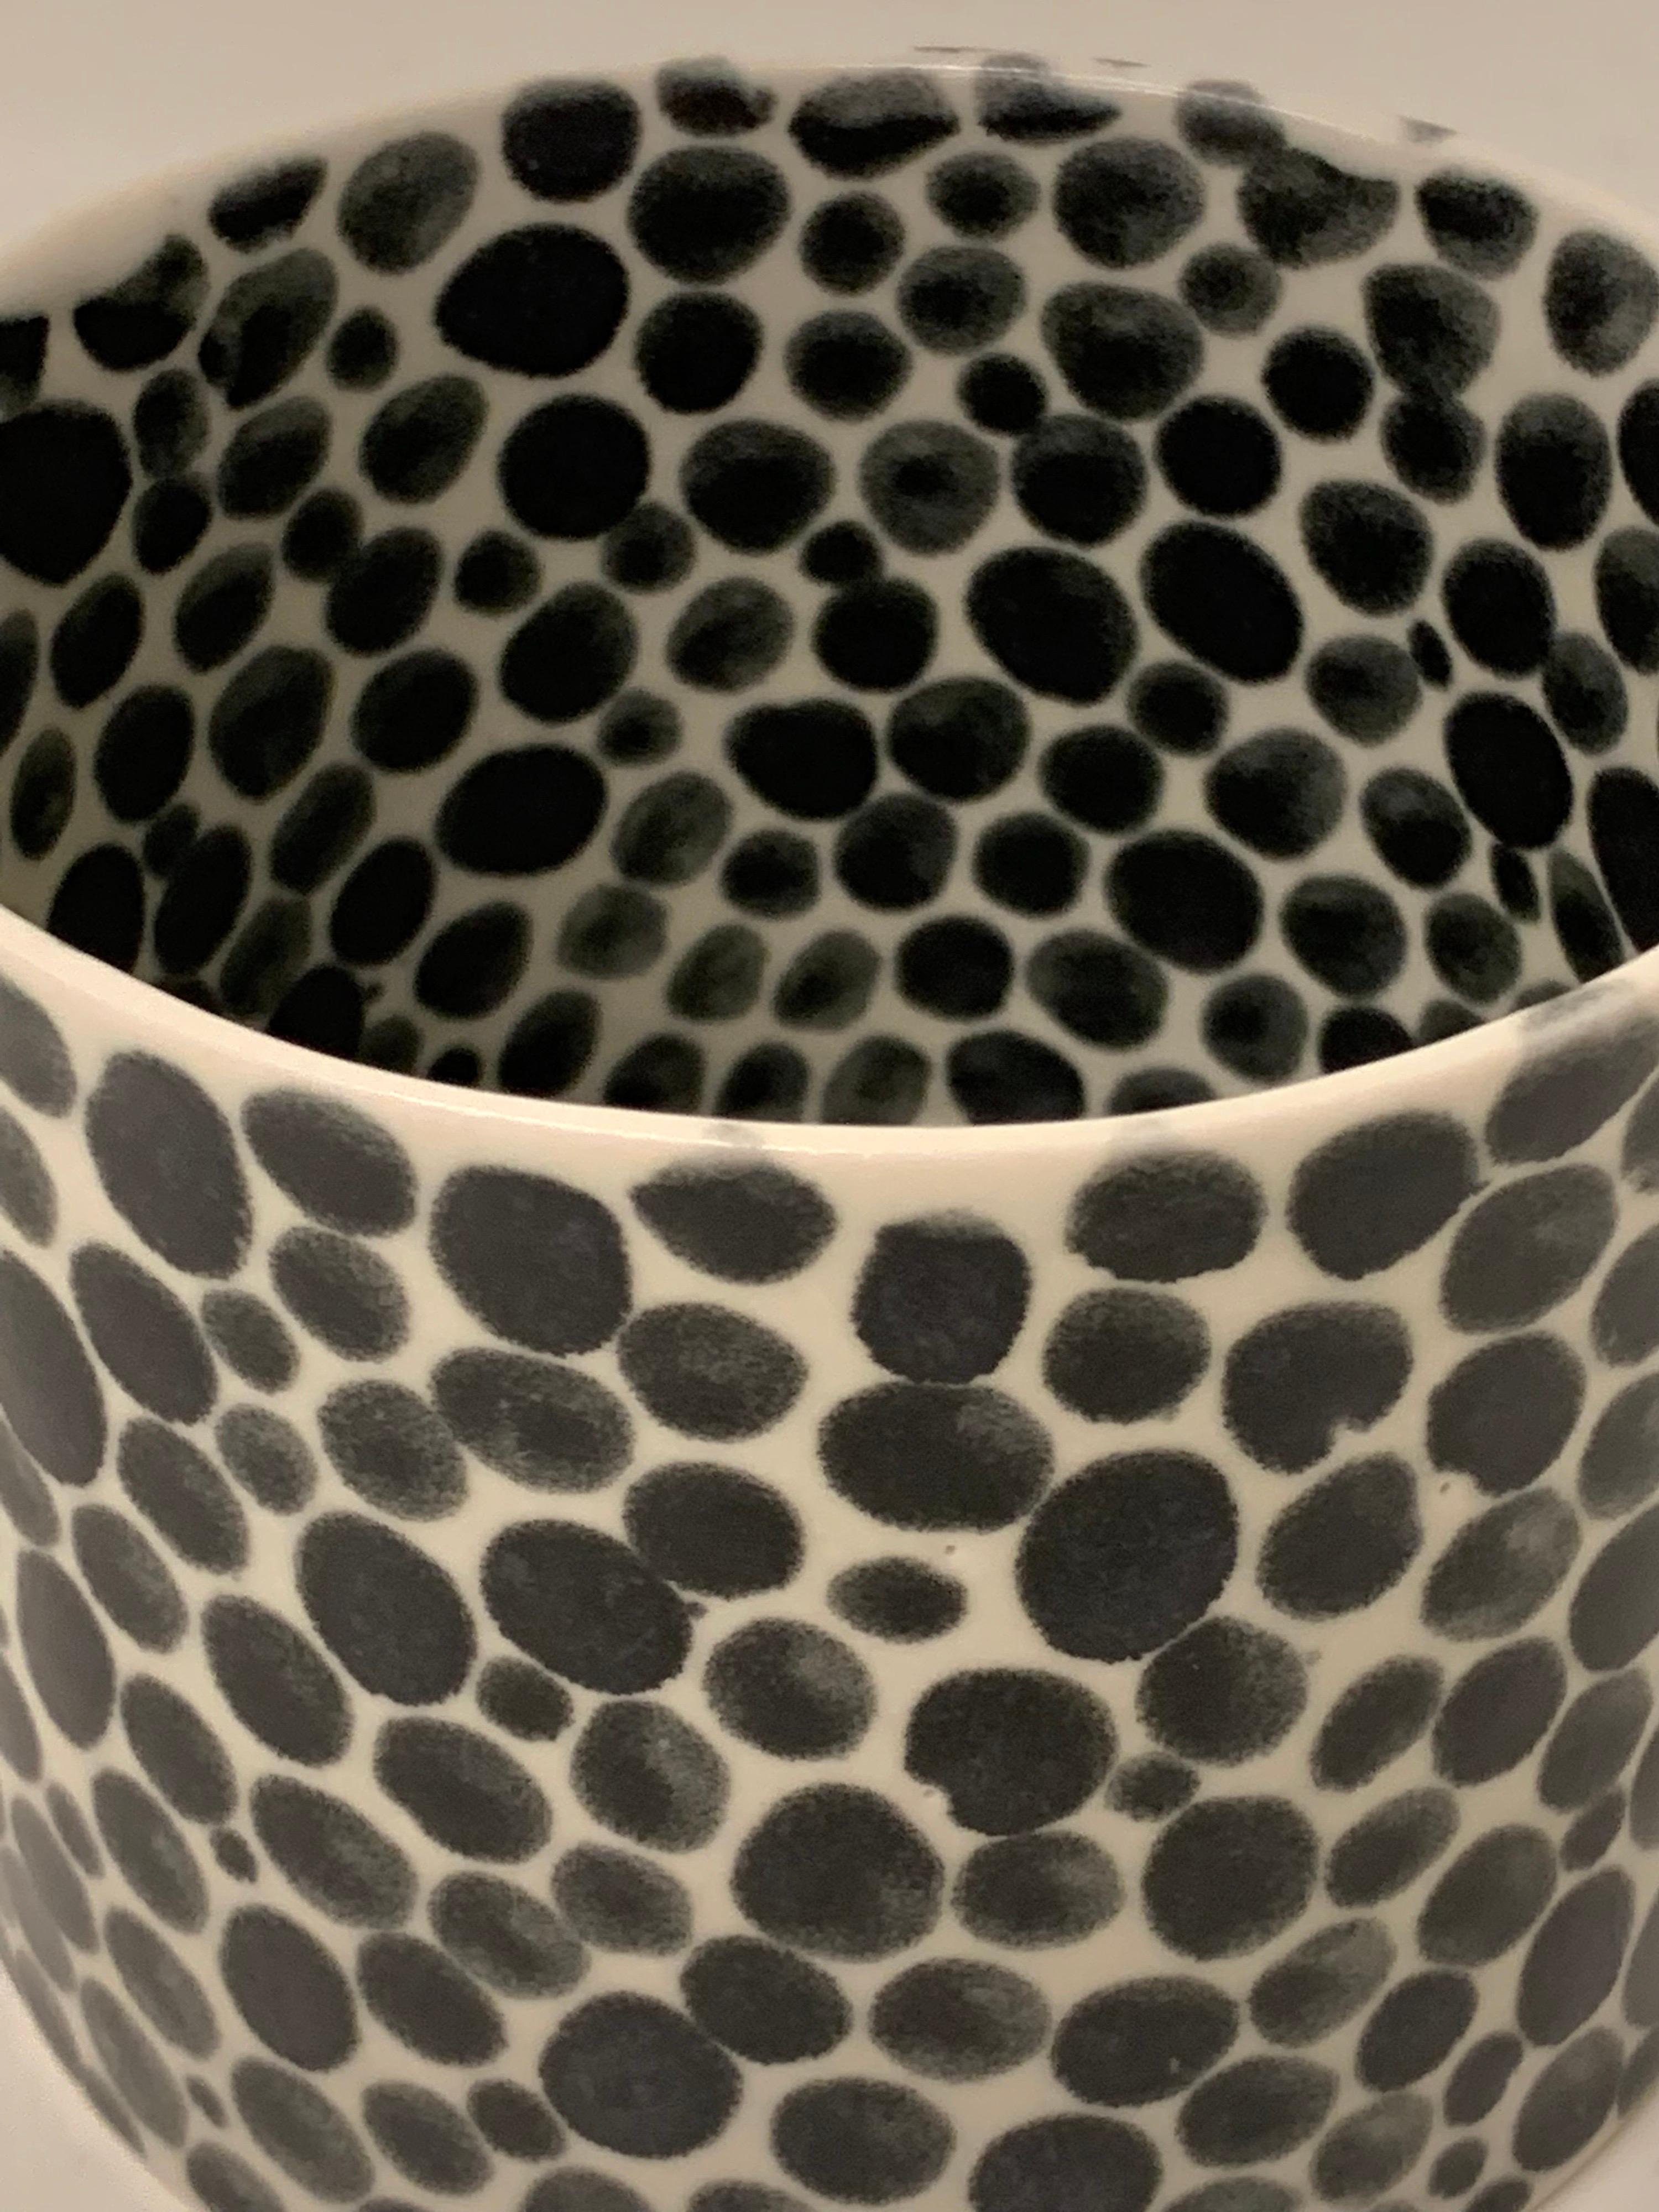 American Ink Dots Small Porcelain Vase